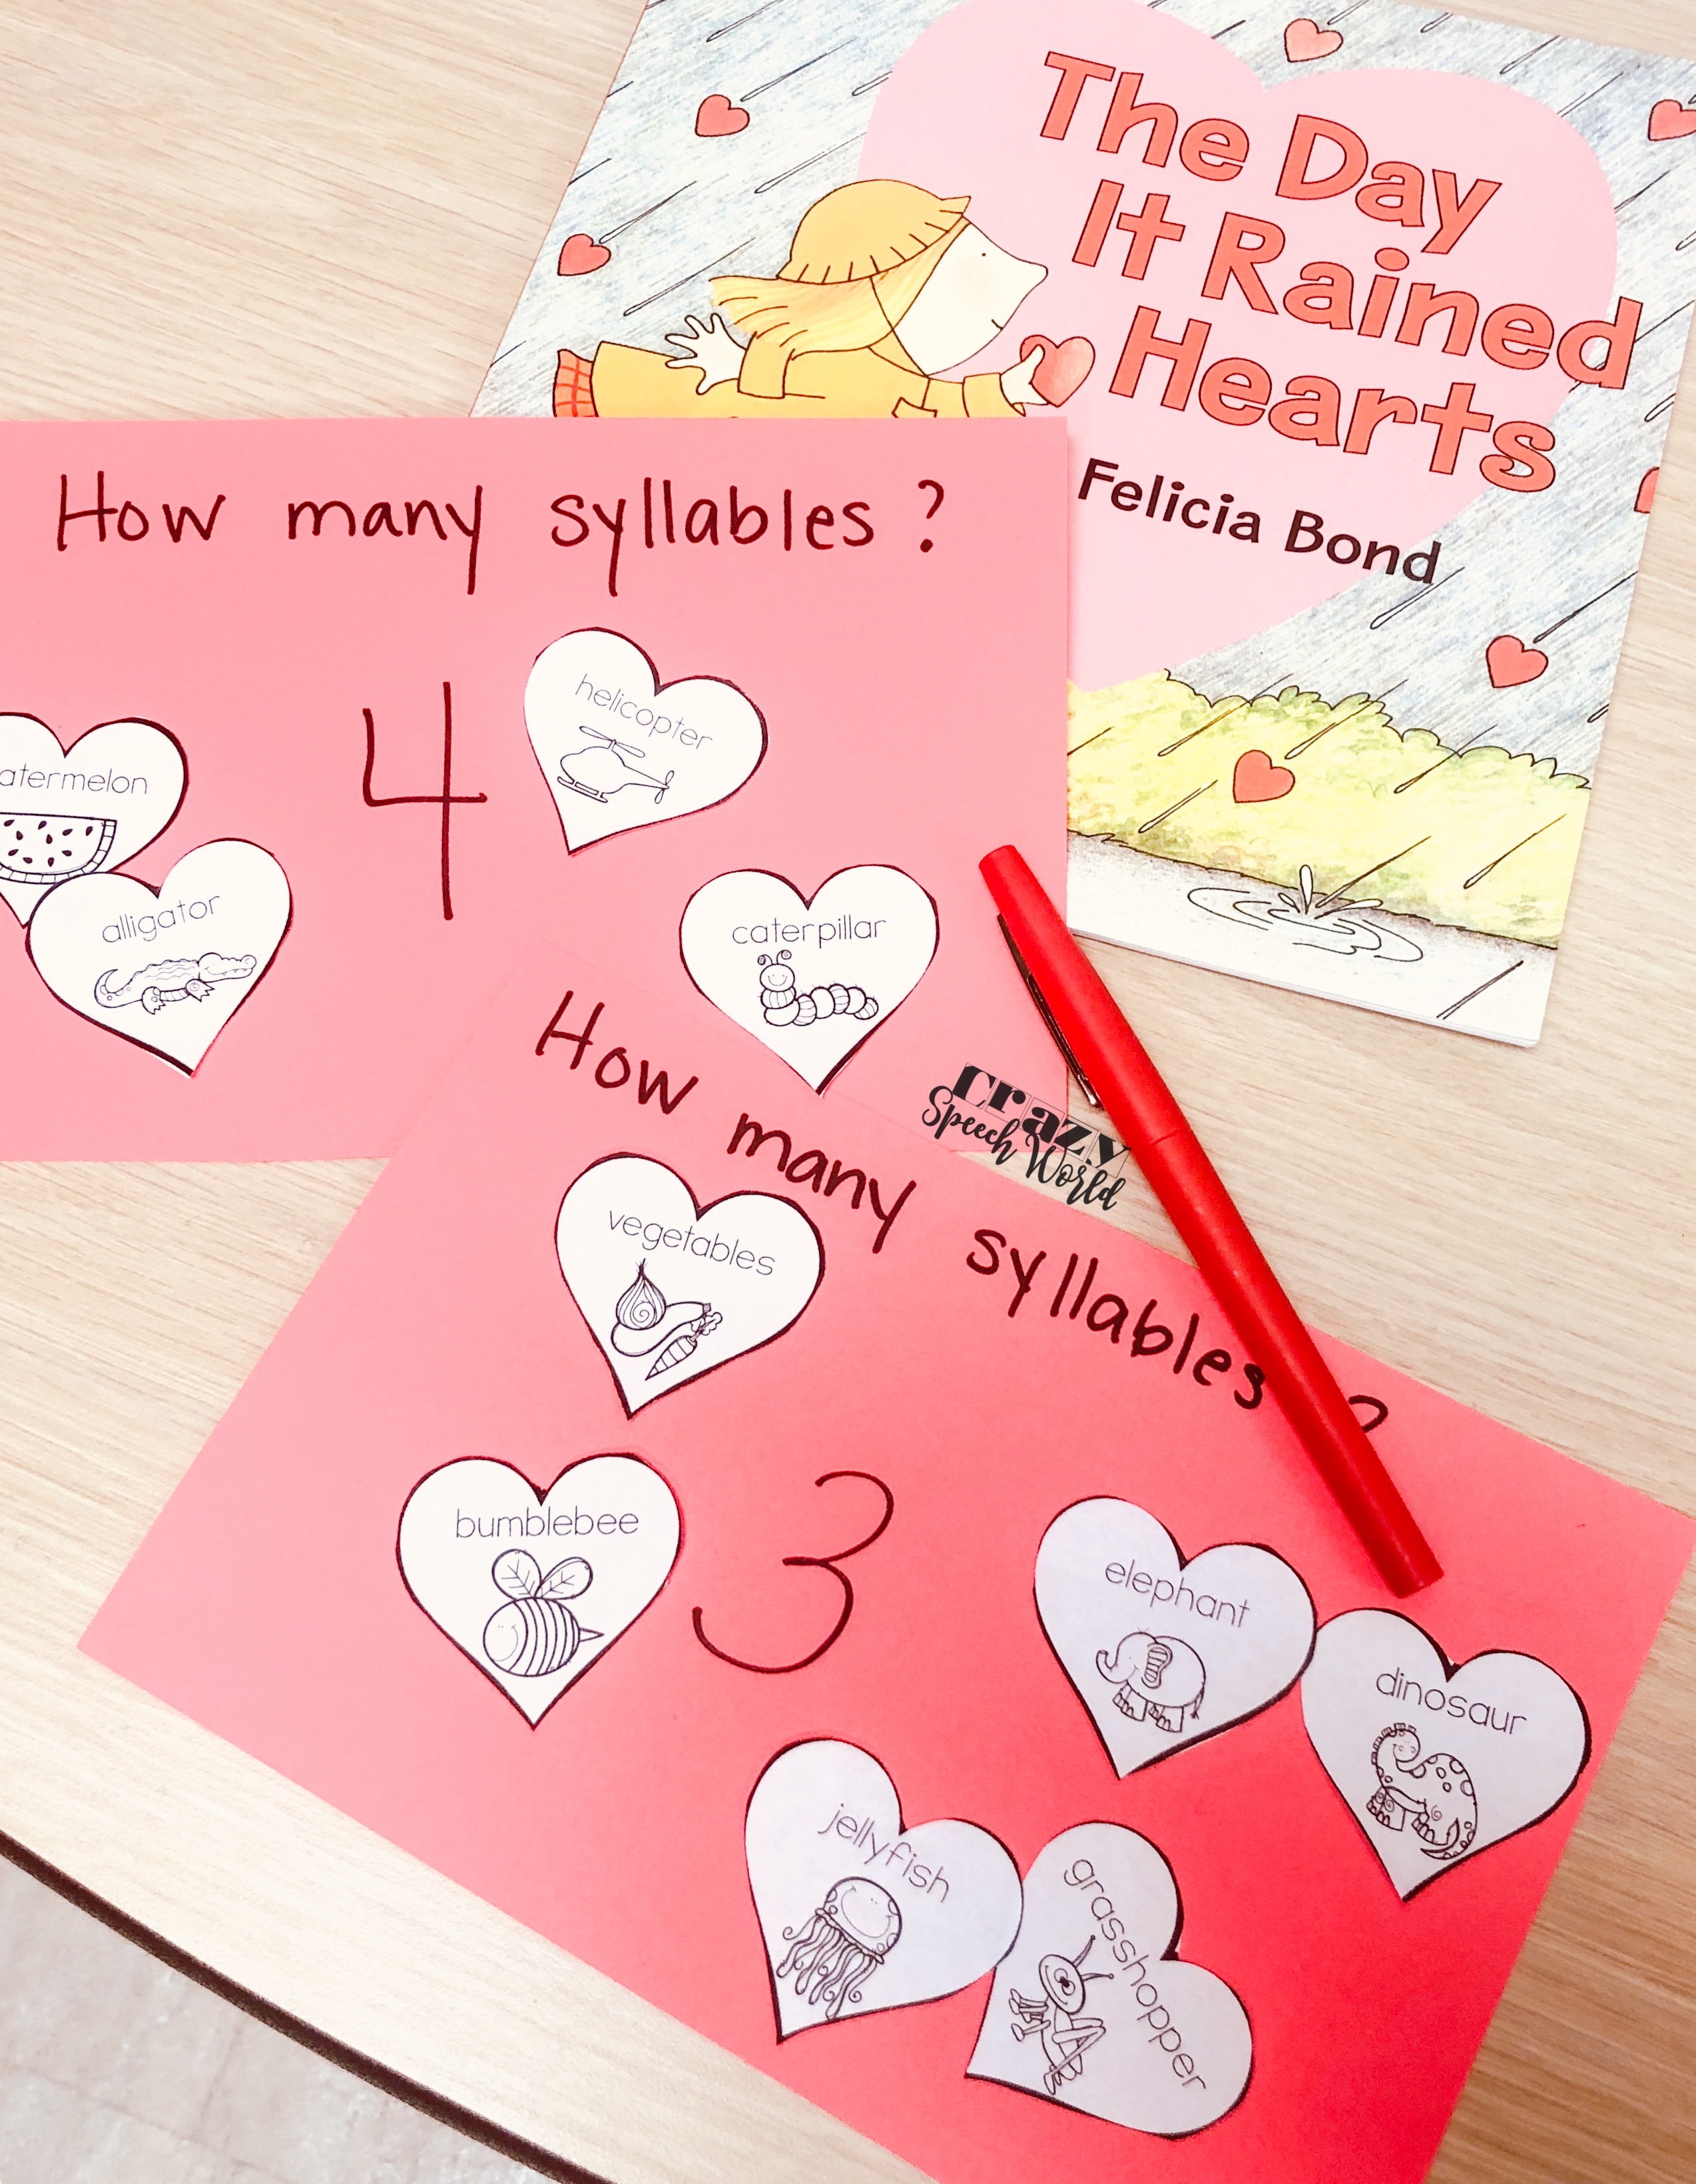 The Day It Rained Hearts: With Valentine Stickers by Felicia Bond